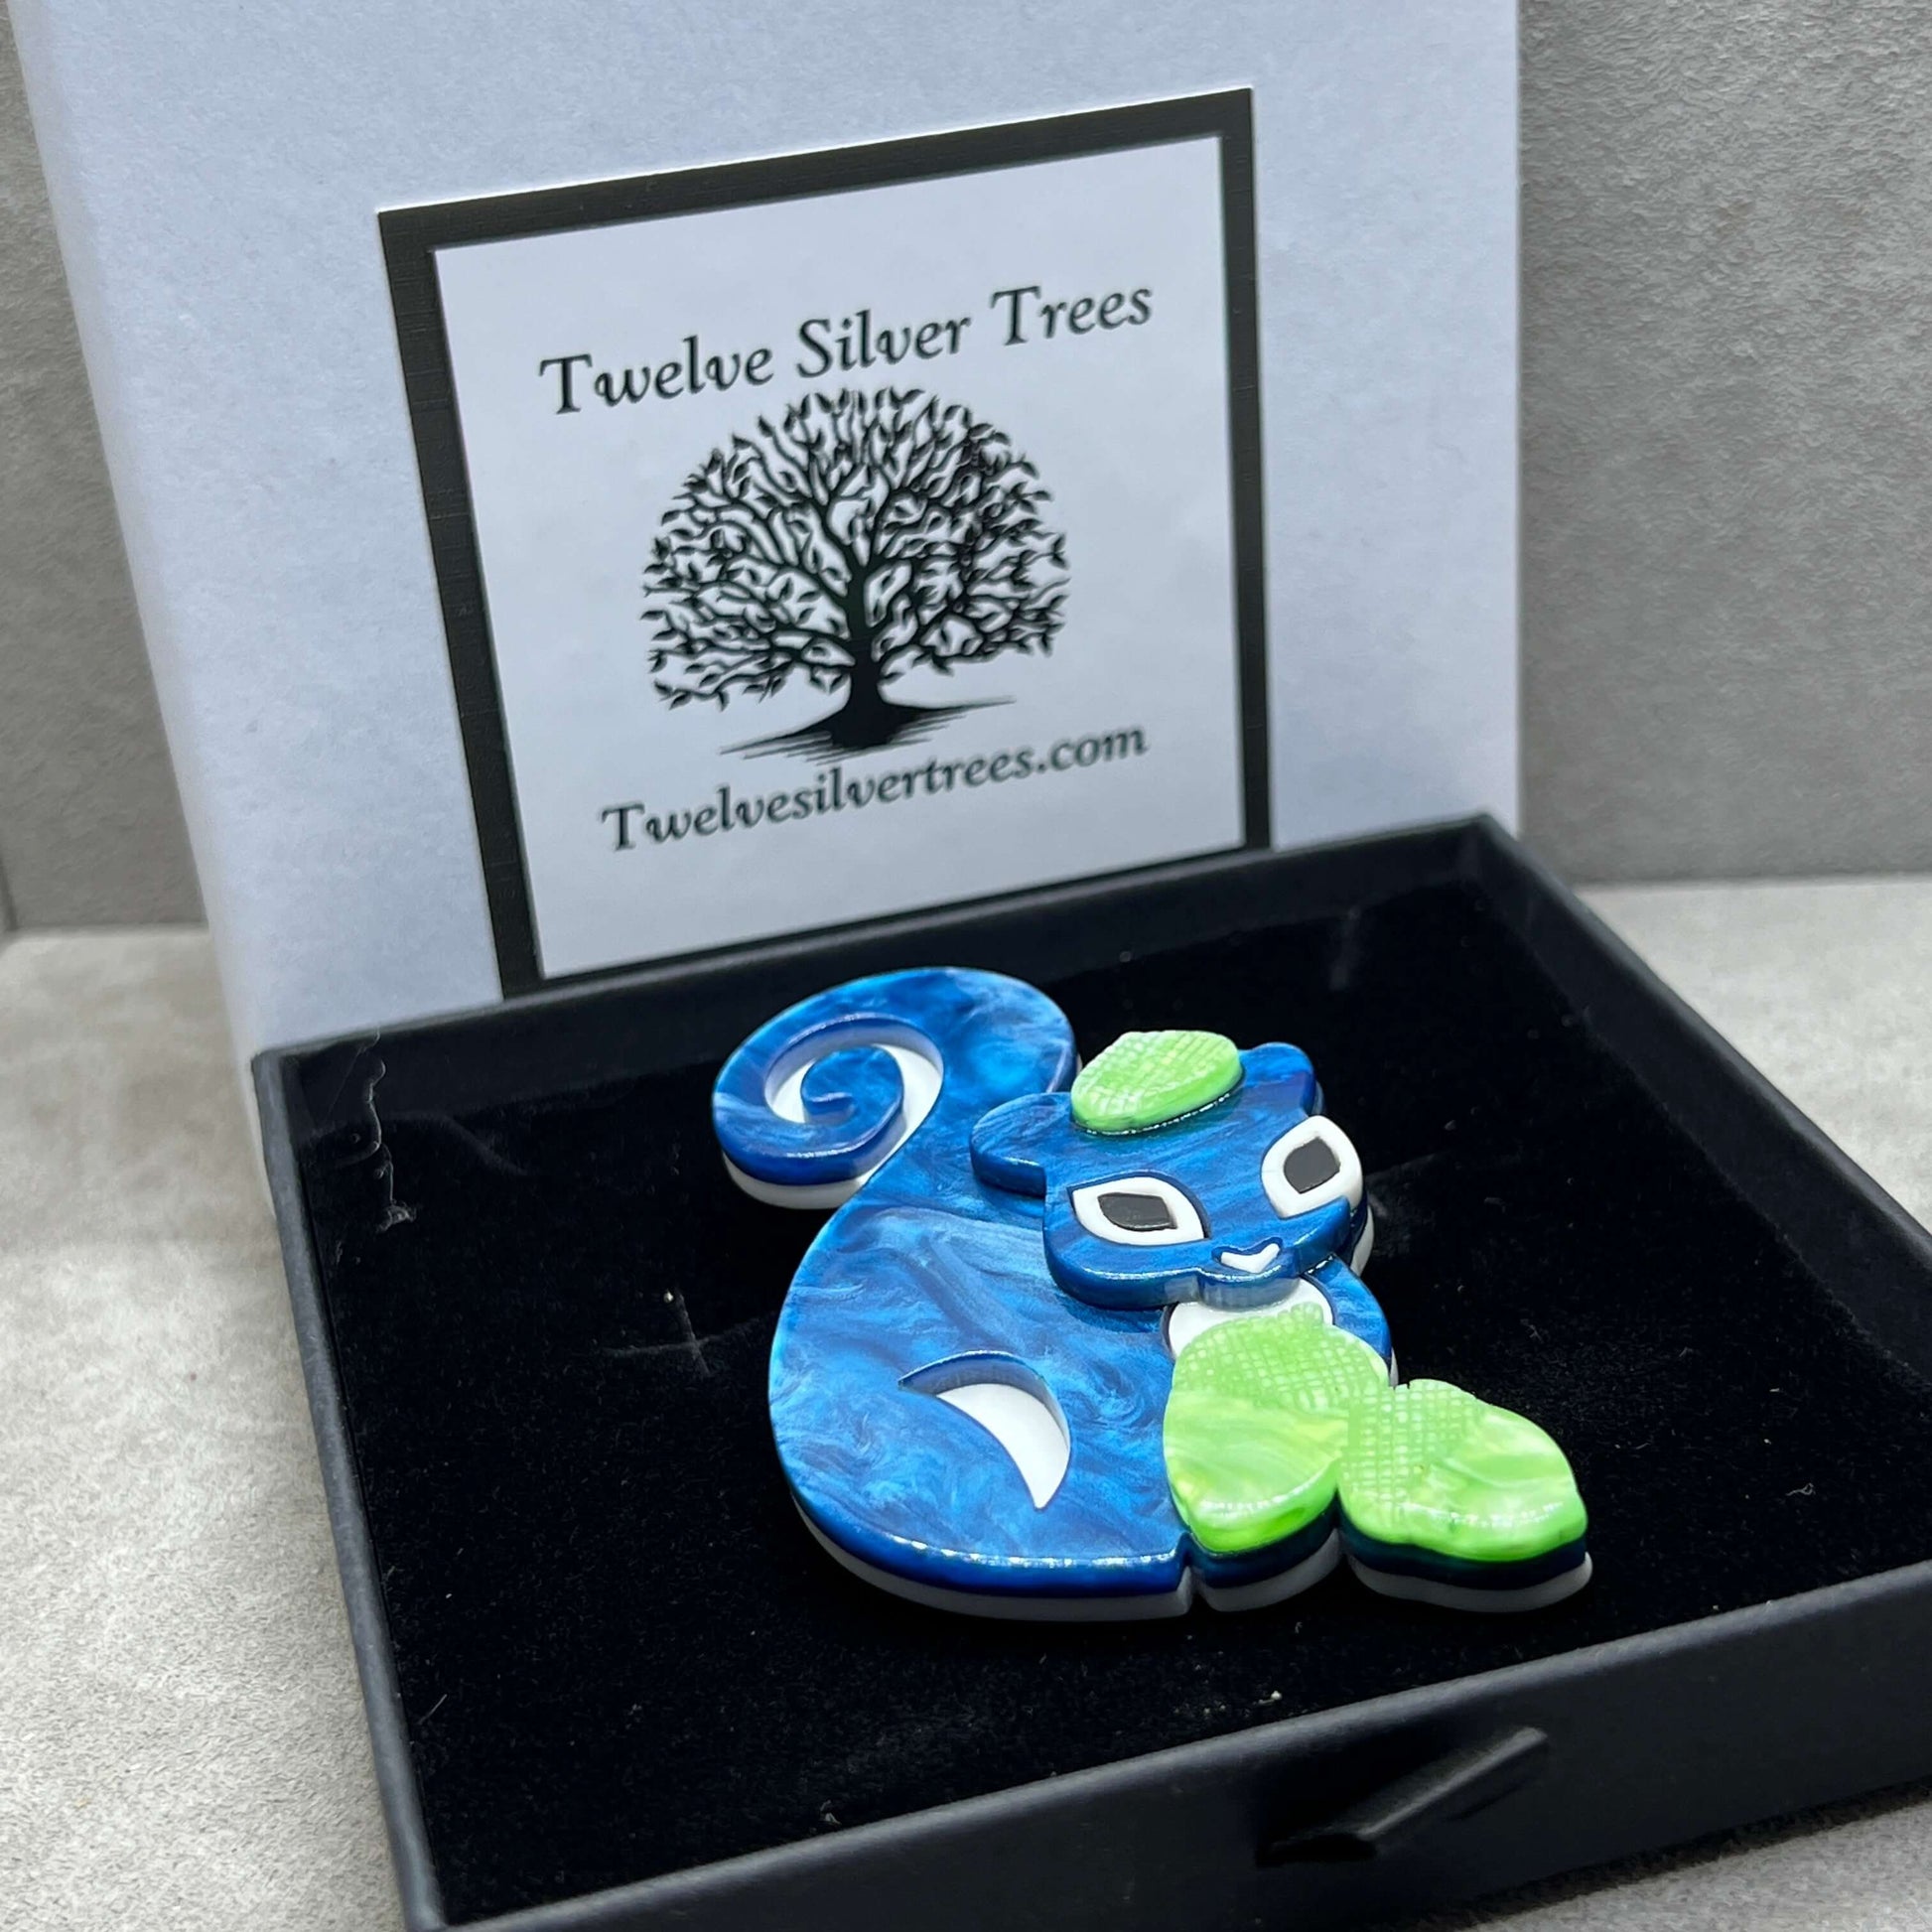 Handmade Acrylic Art Brooch - “Nuts About You” Blue Squirrel - Twelve Silver Trees